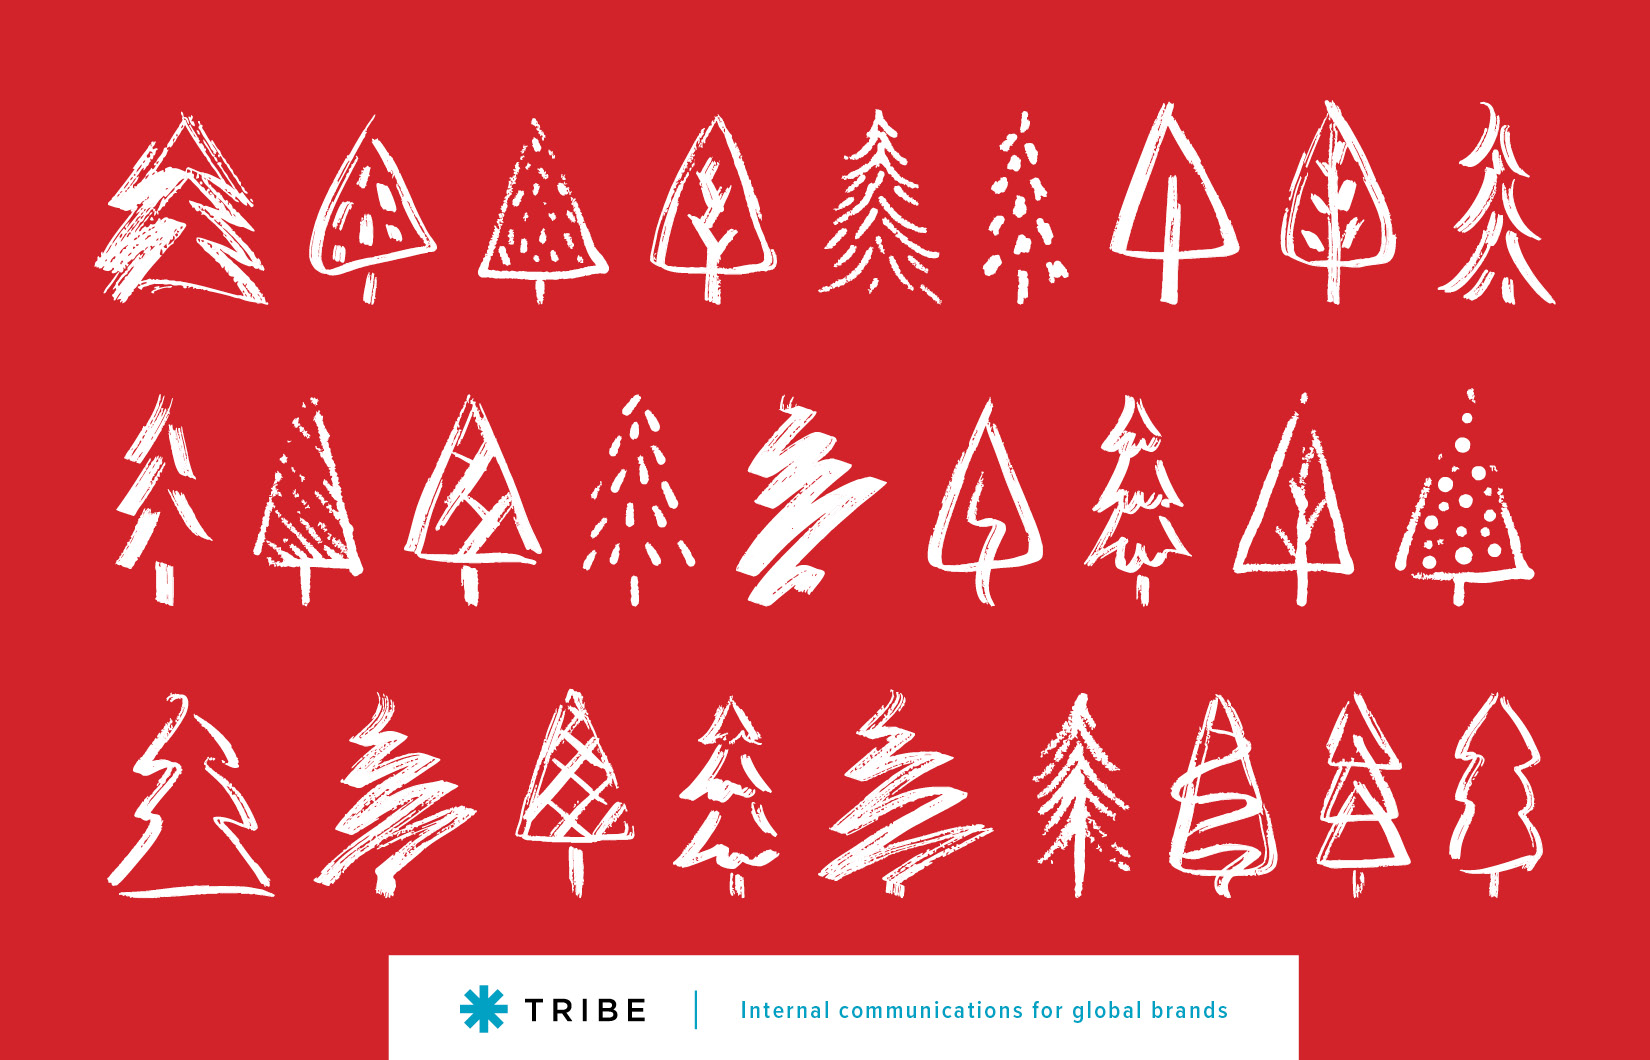 White Christmas tree sketches on red background with Tribe insignia, referencing the need to simplify internal comms for the holidays.